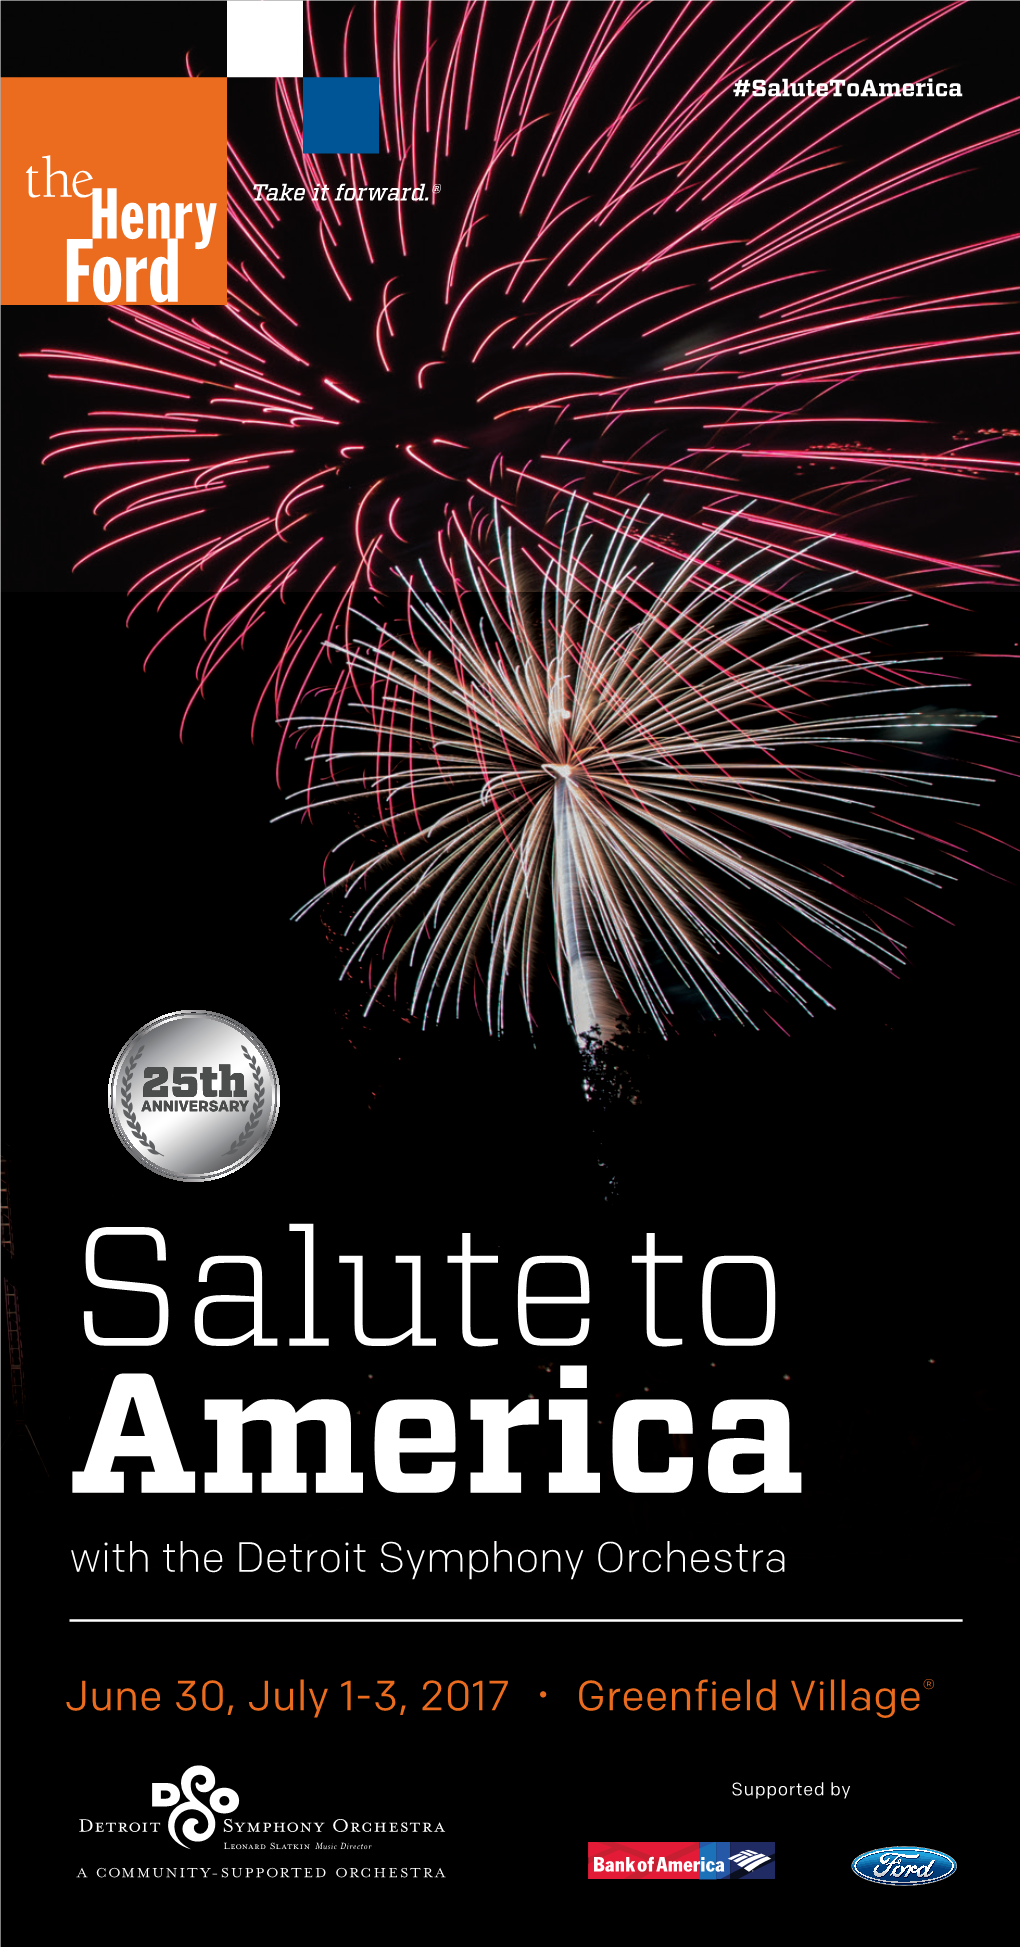 Salute to America with the Detroit Symphony Orchestra